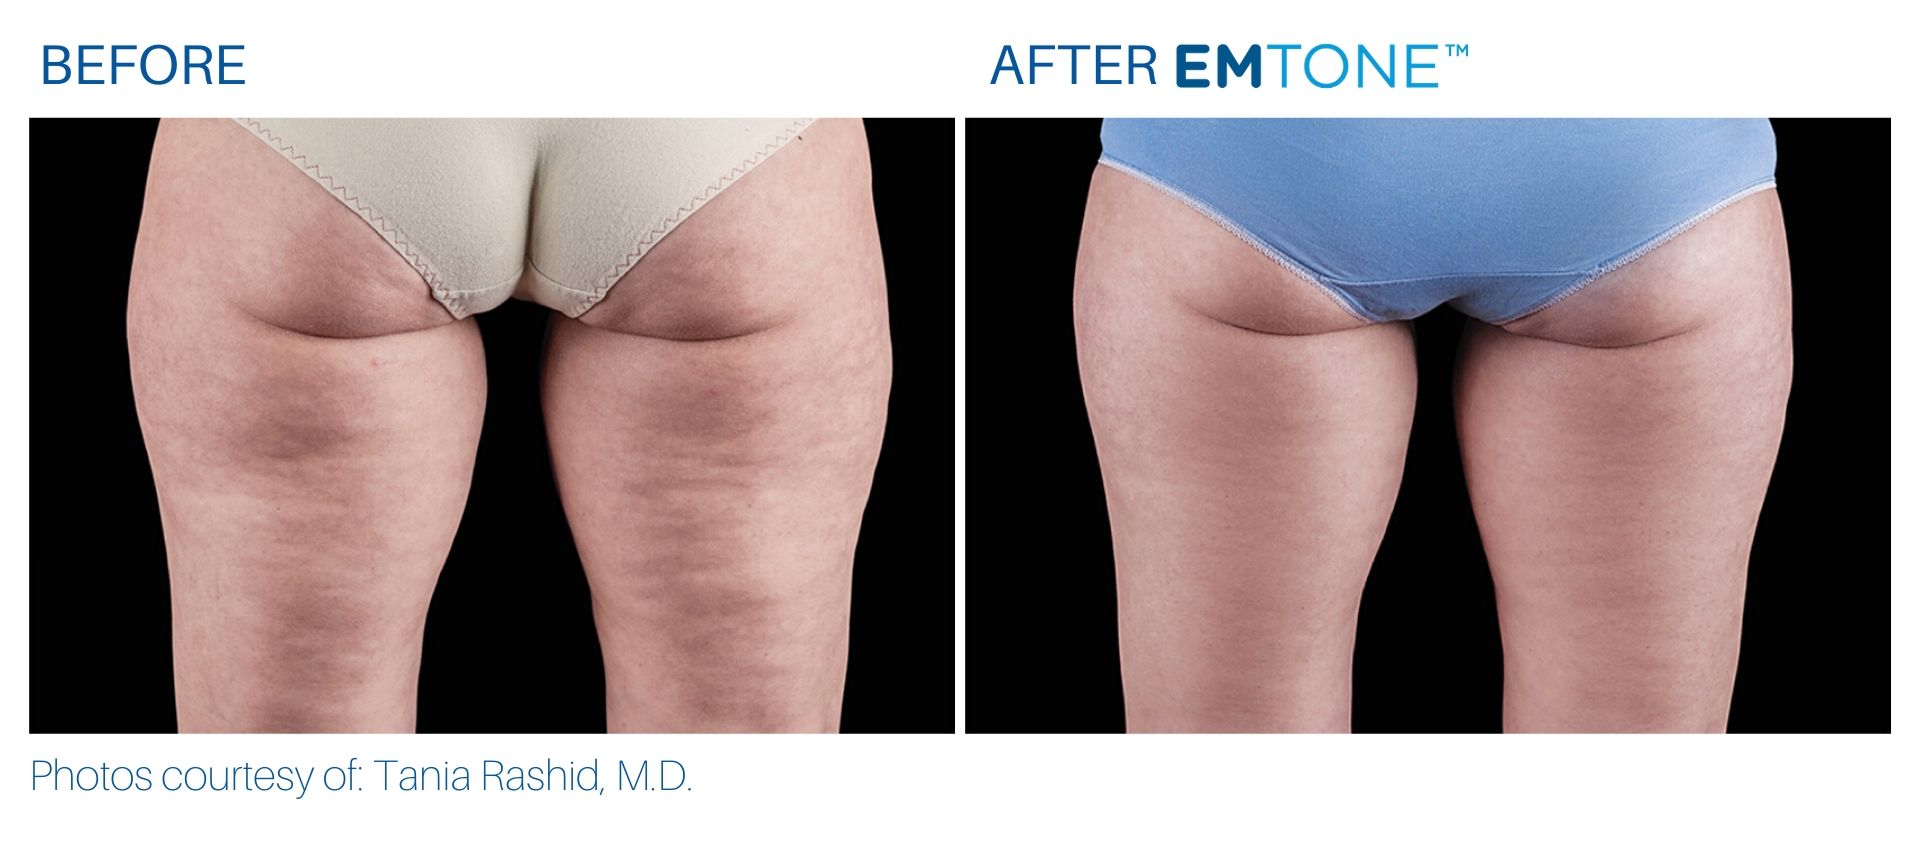 emtone_before_and_after_bodymorphmd_5